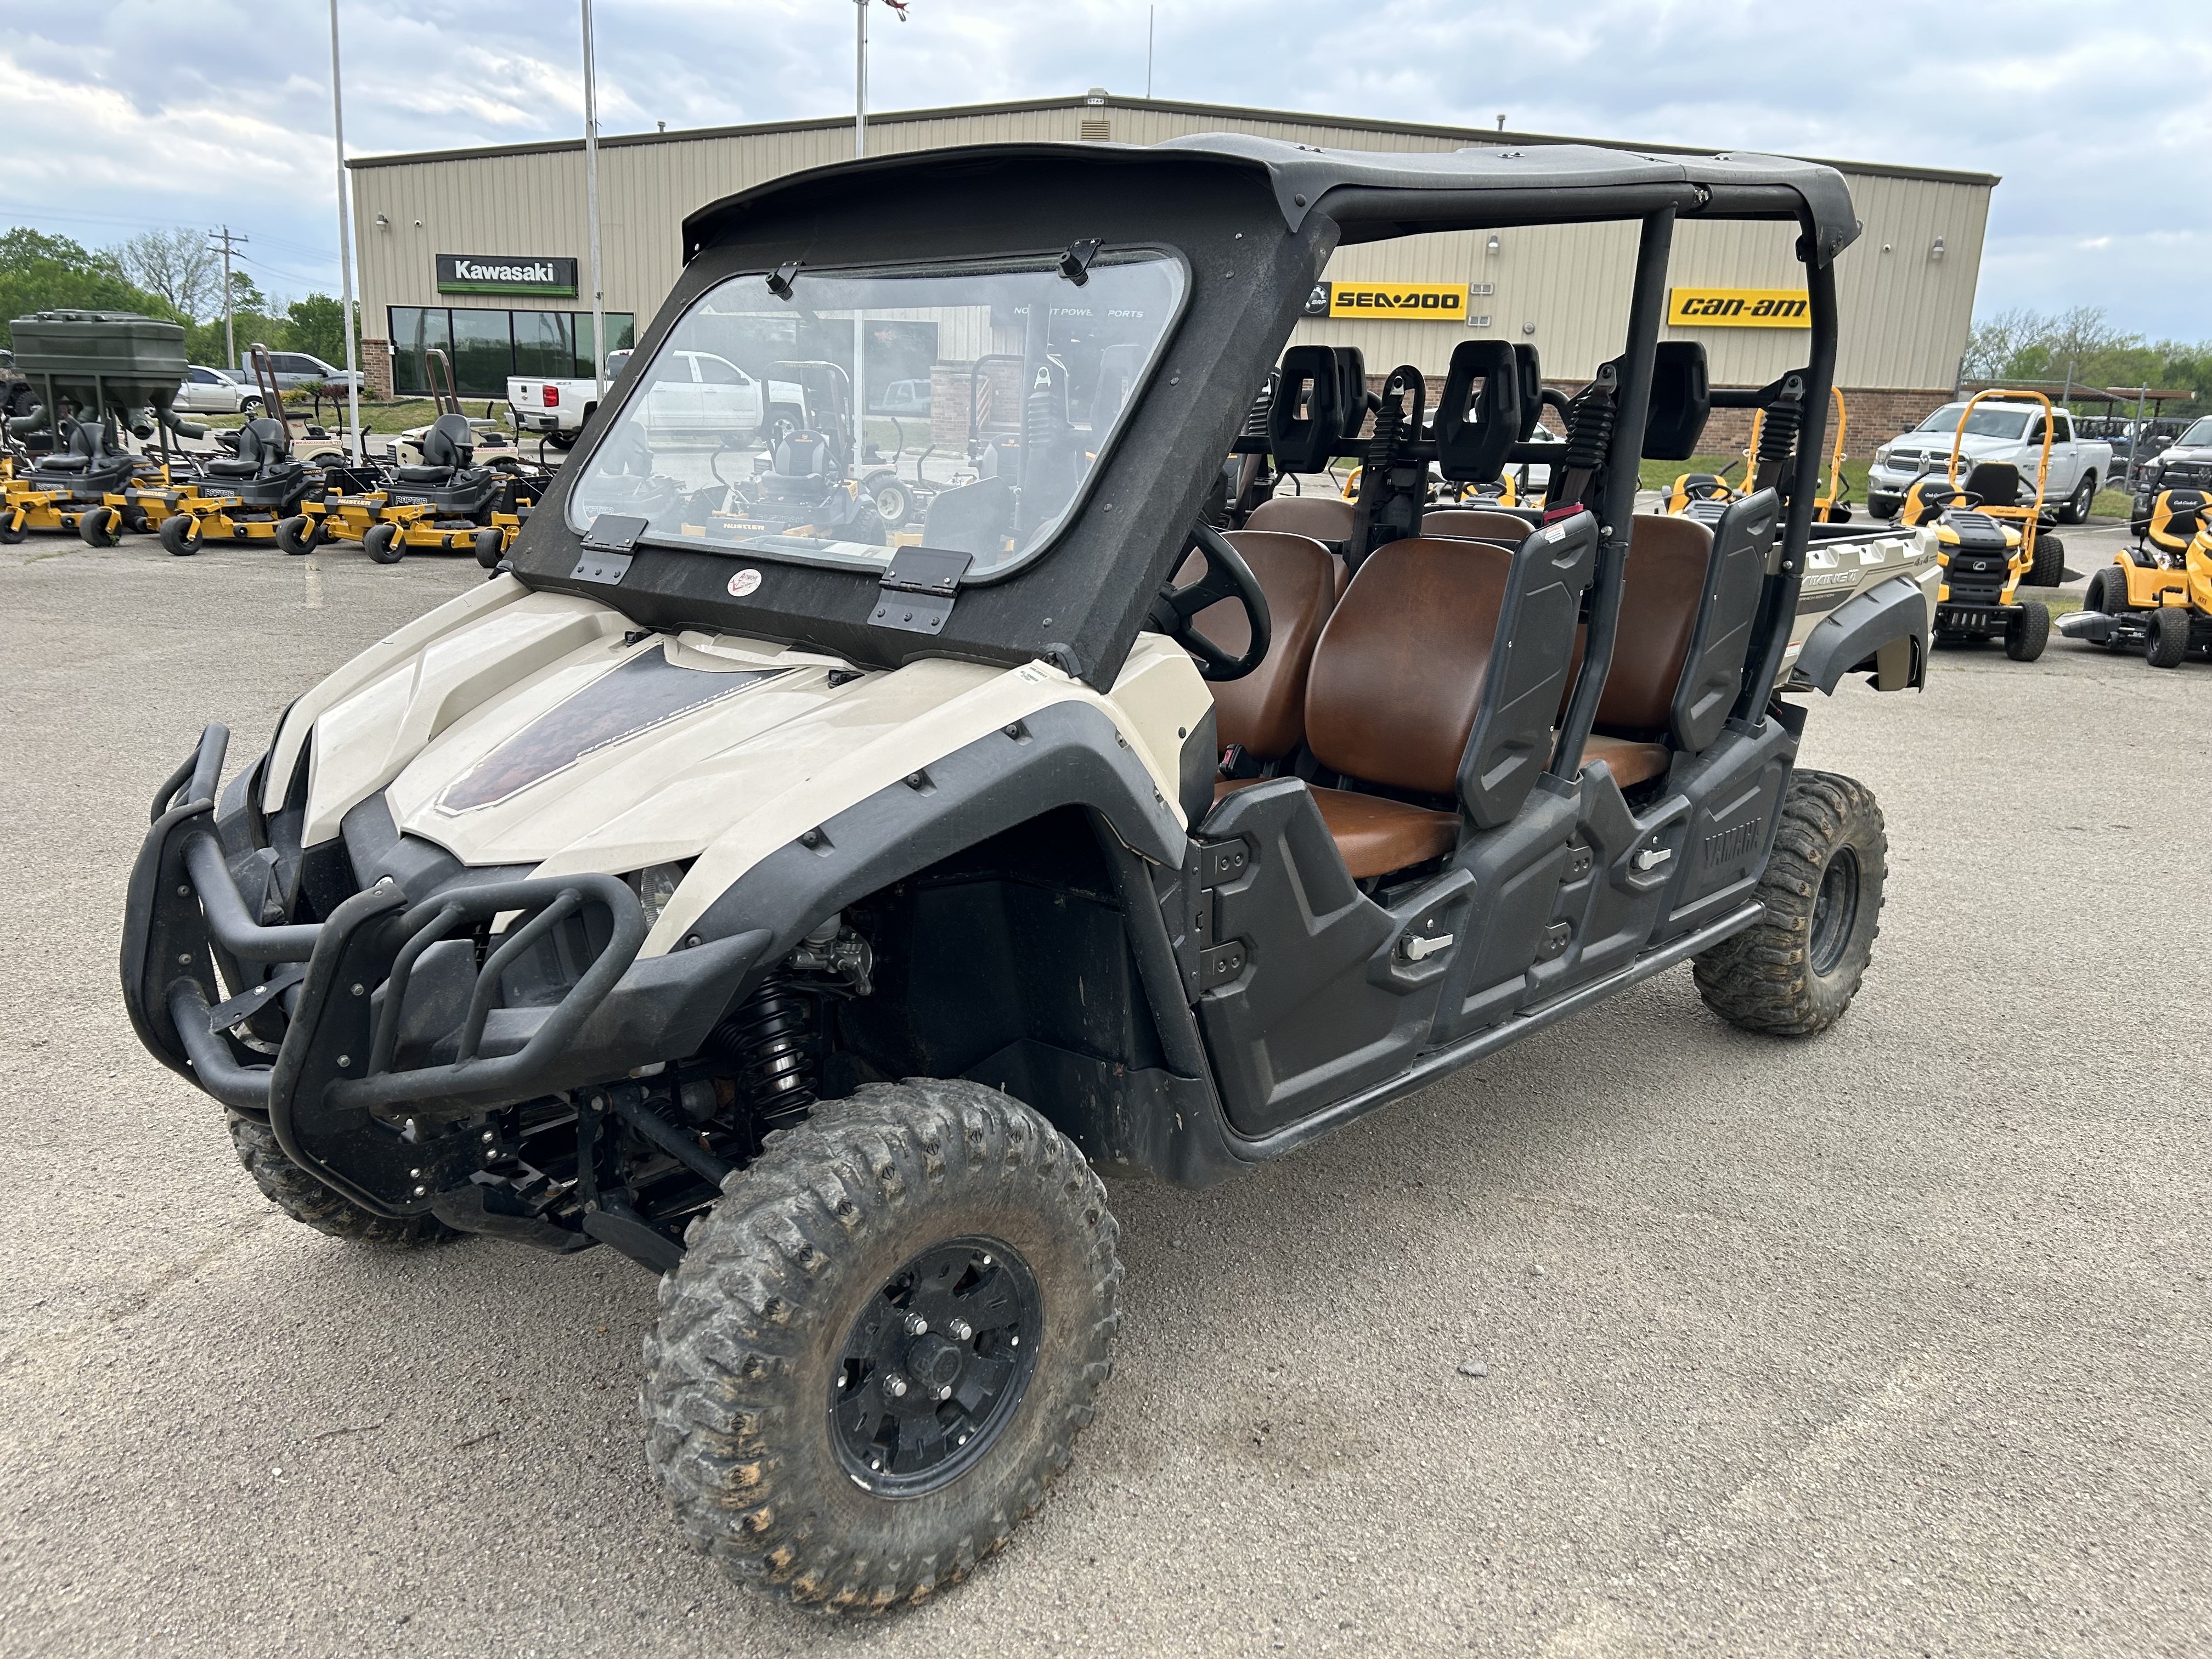 2019 VIKING 6 EPS RANCH EDITION VIKING 6 EPS RANCH EDITION 1023890324 - Click for larger photo